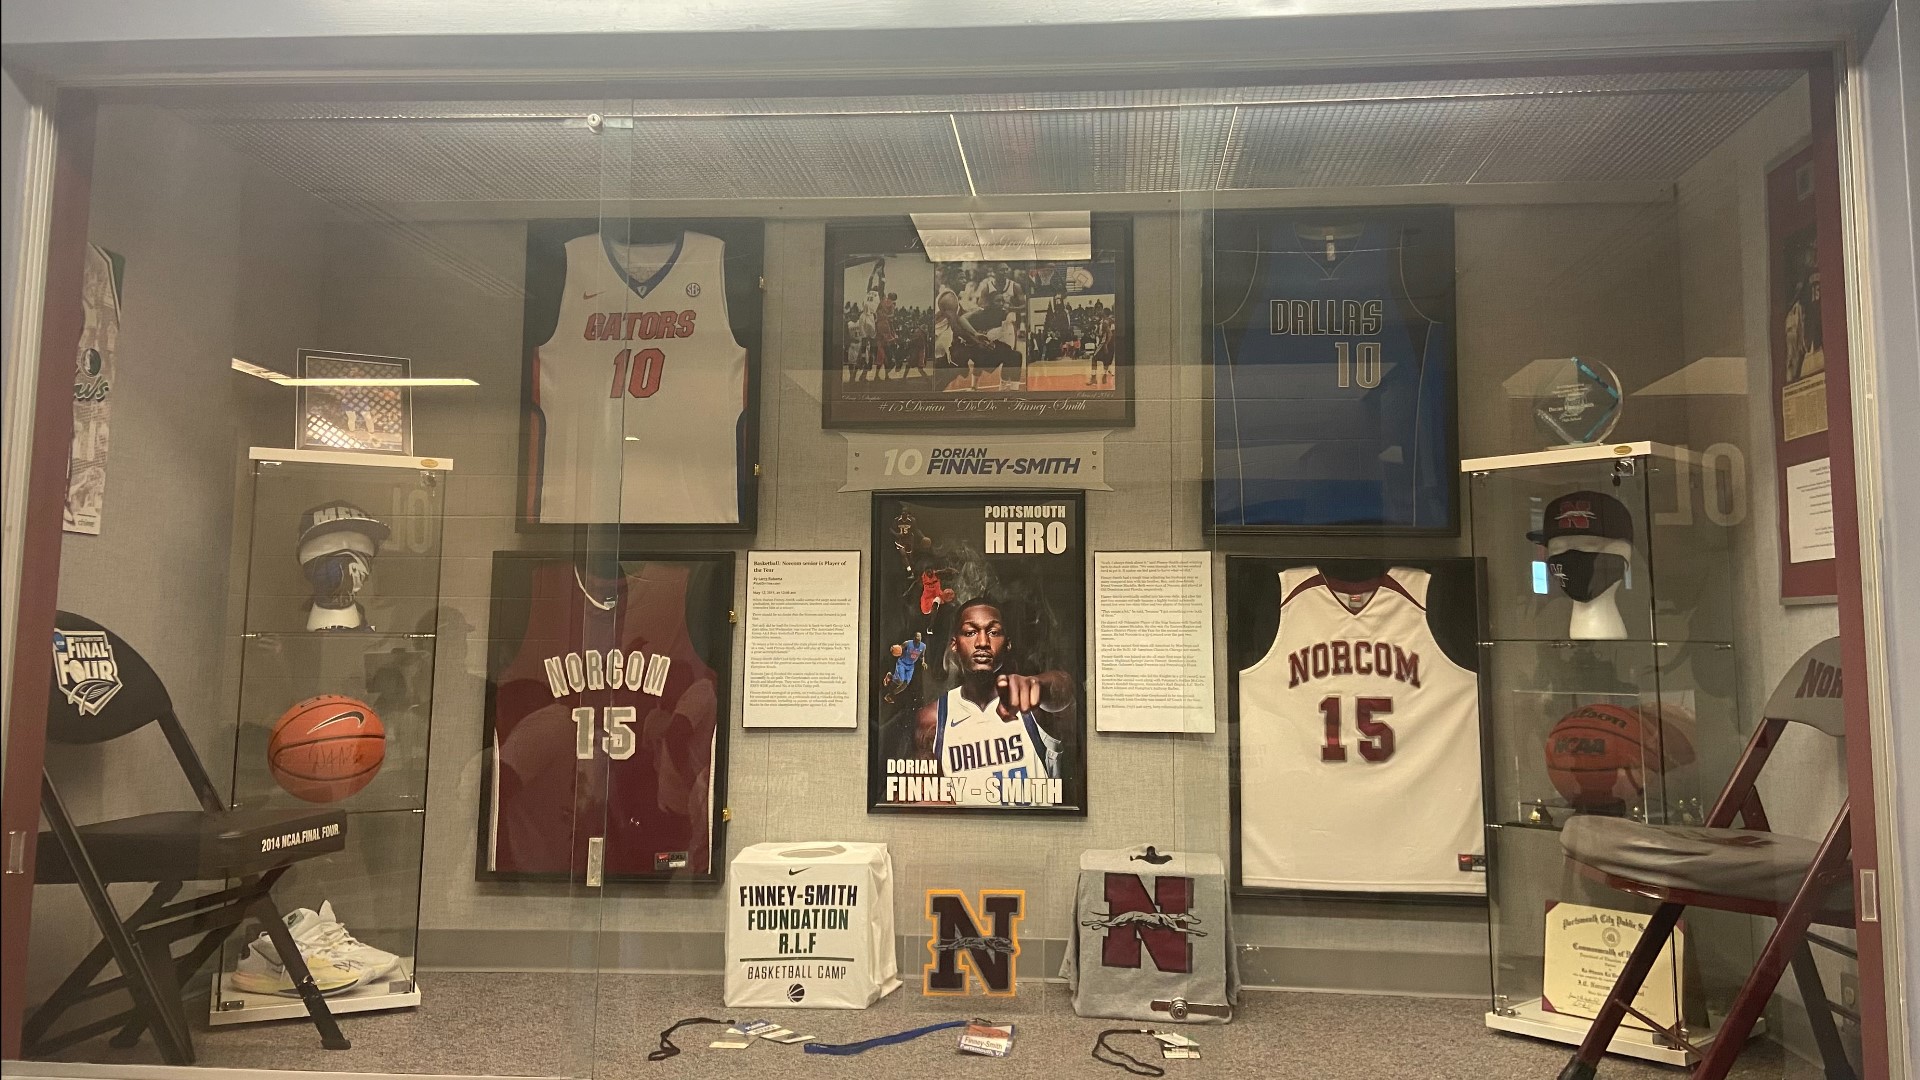 Members of the Portsmouth Public School system unveiled a display of Dorian Finney- Smith's memorabilia on Saturday morning at his alma mater.